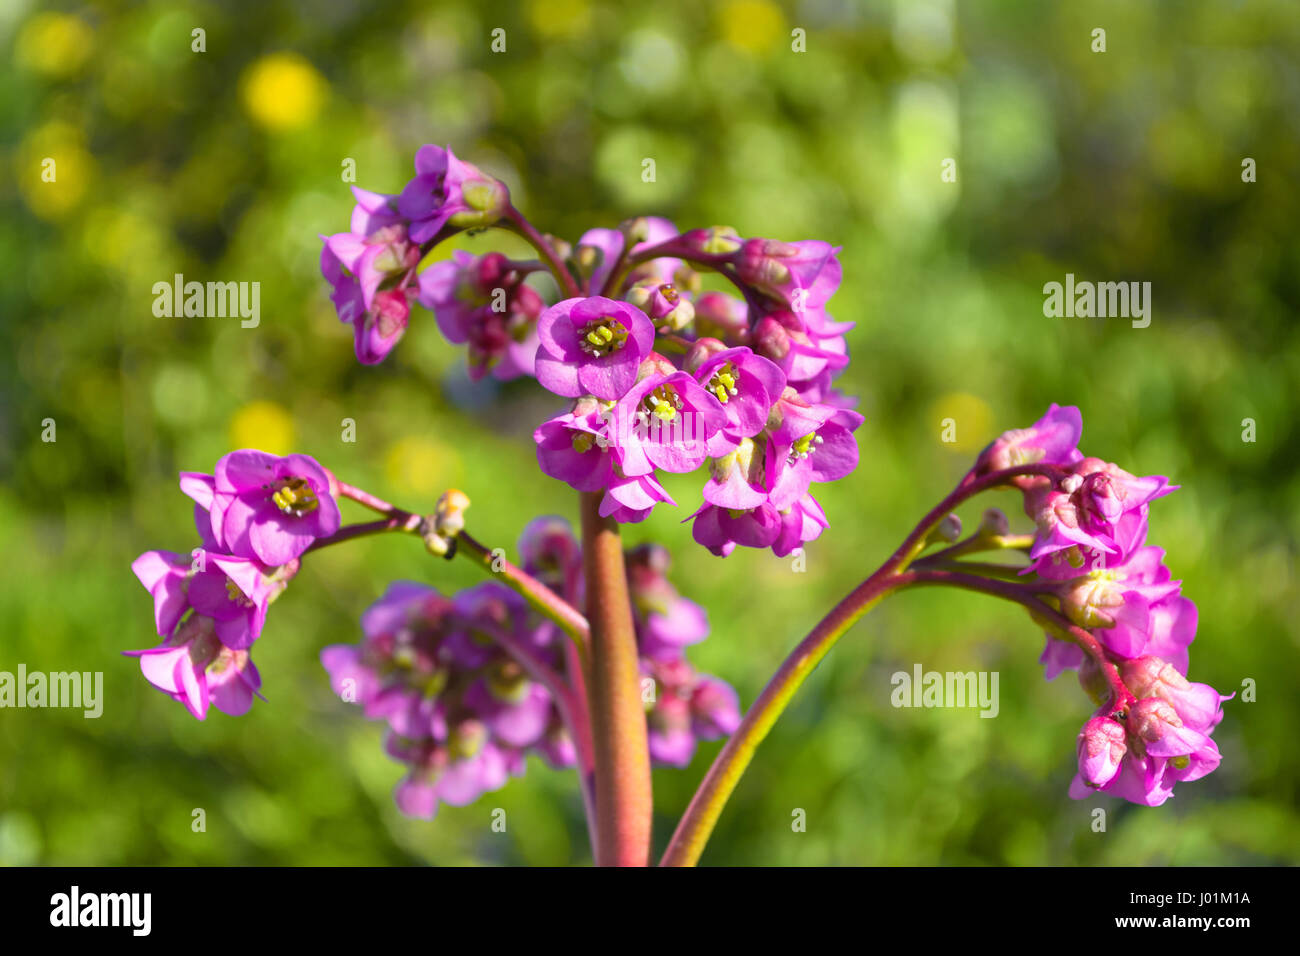 Bergenia flowers on natural background Stock Photo